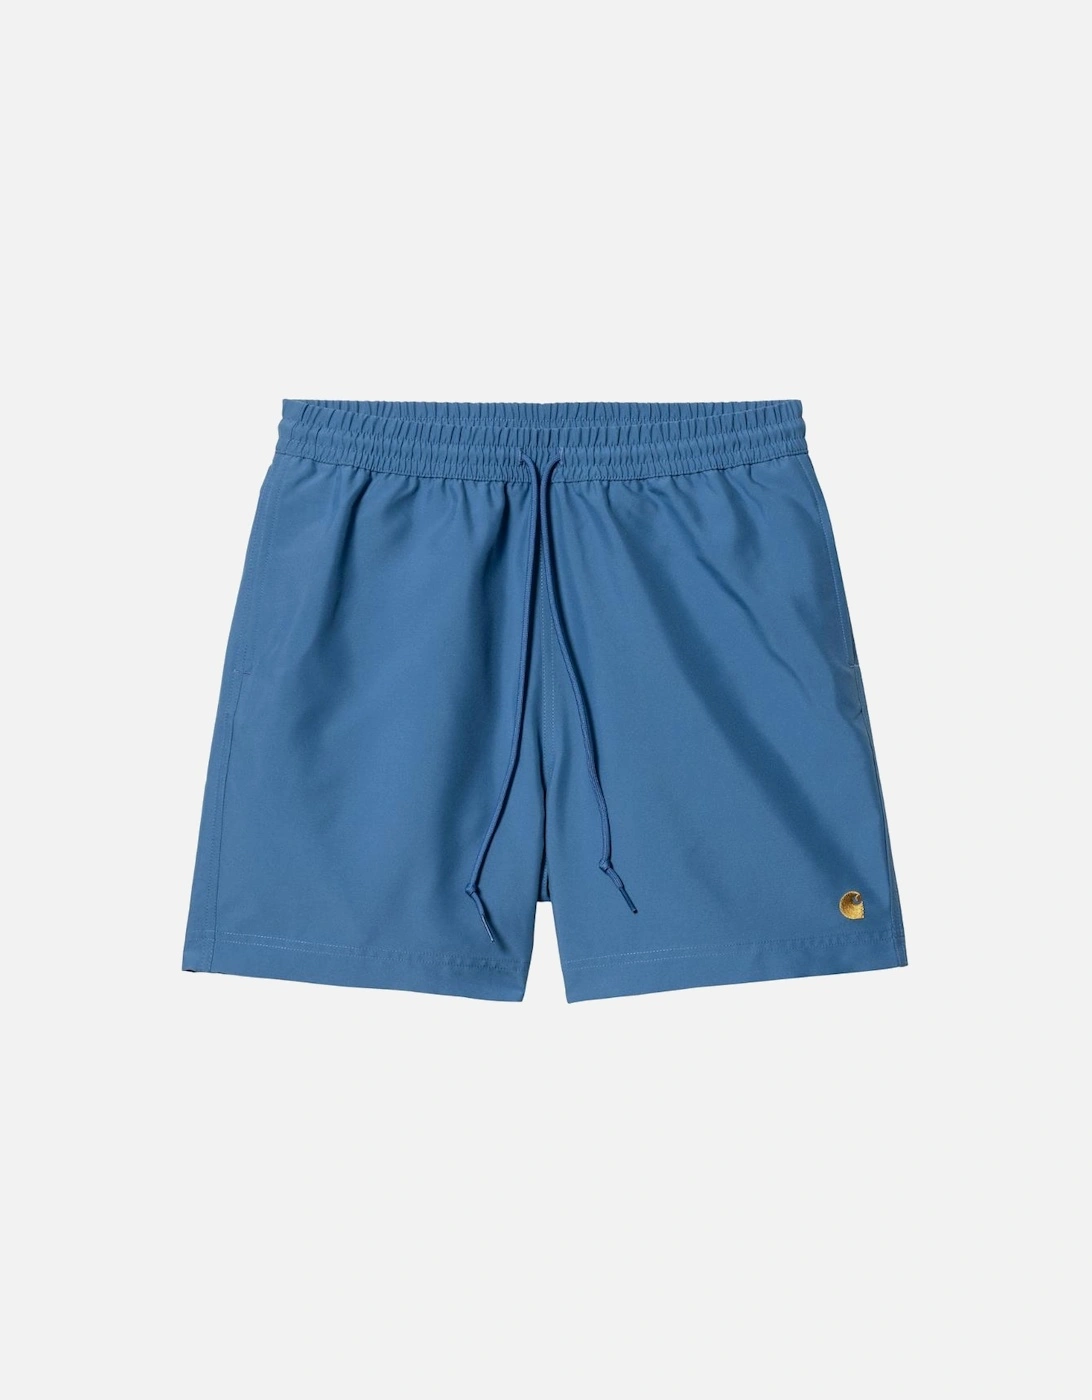 Chase Swim Trunk - Acapulco/Gold, 5 of 4